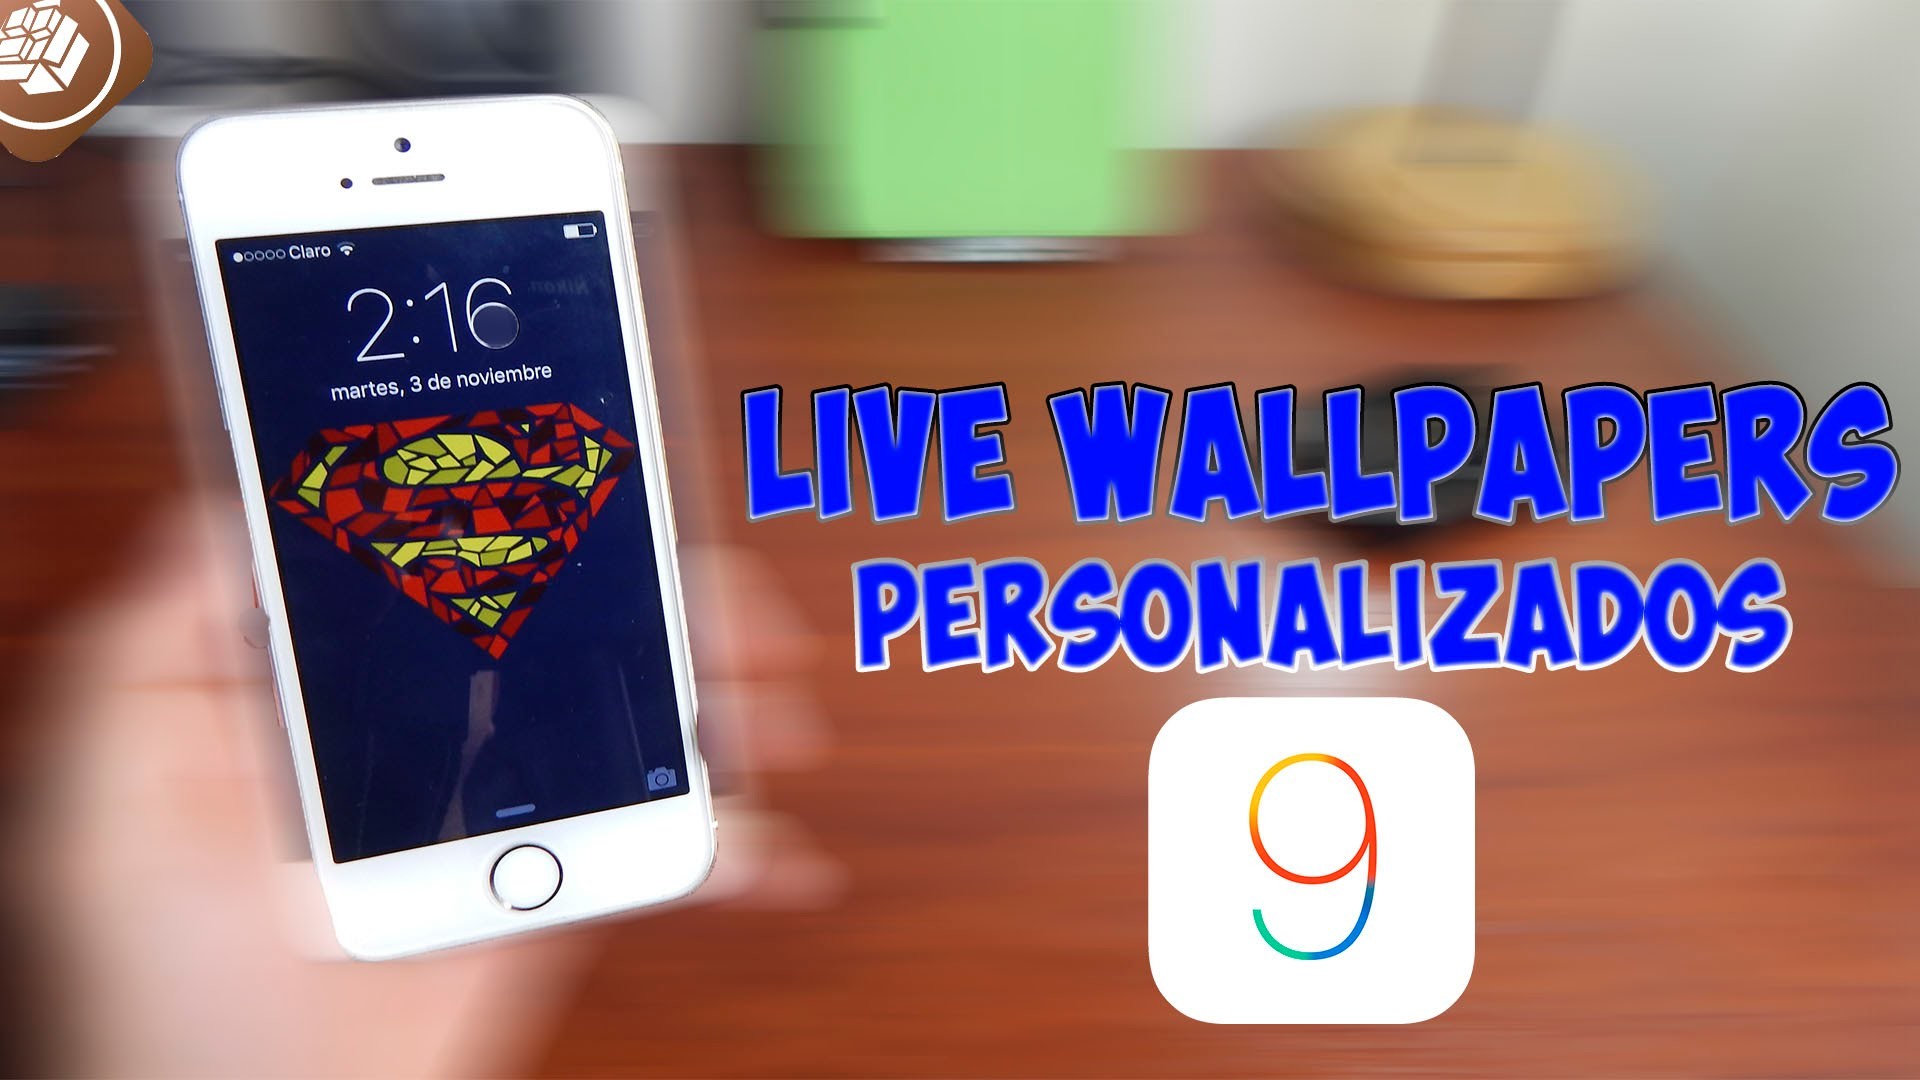 Live Wallpaper for iPhone 4S (56+ images)